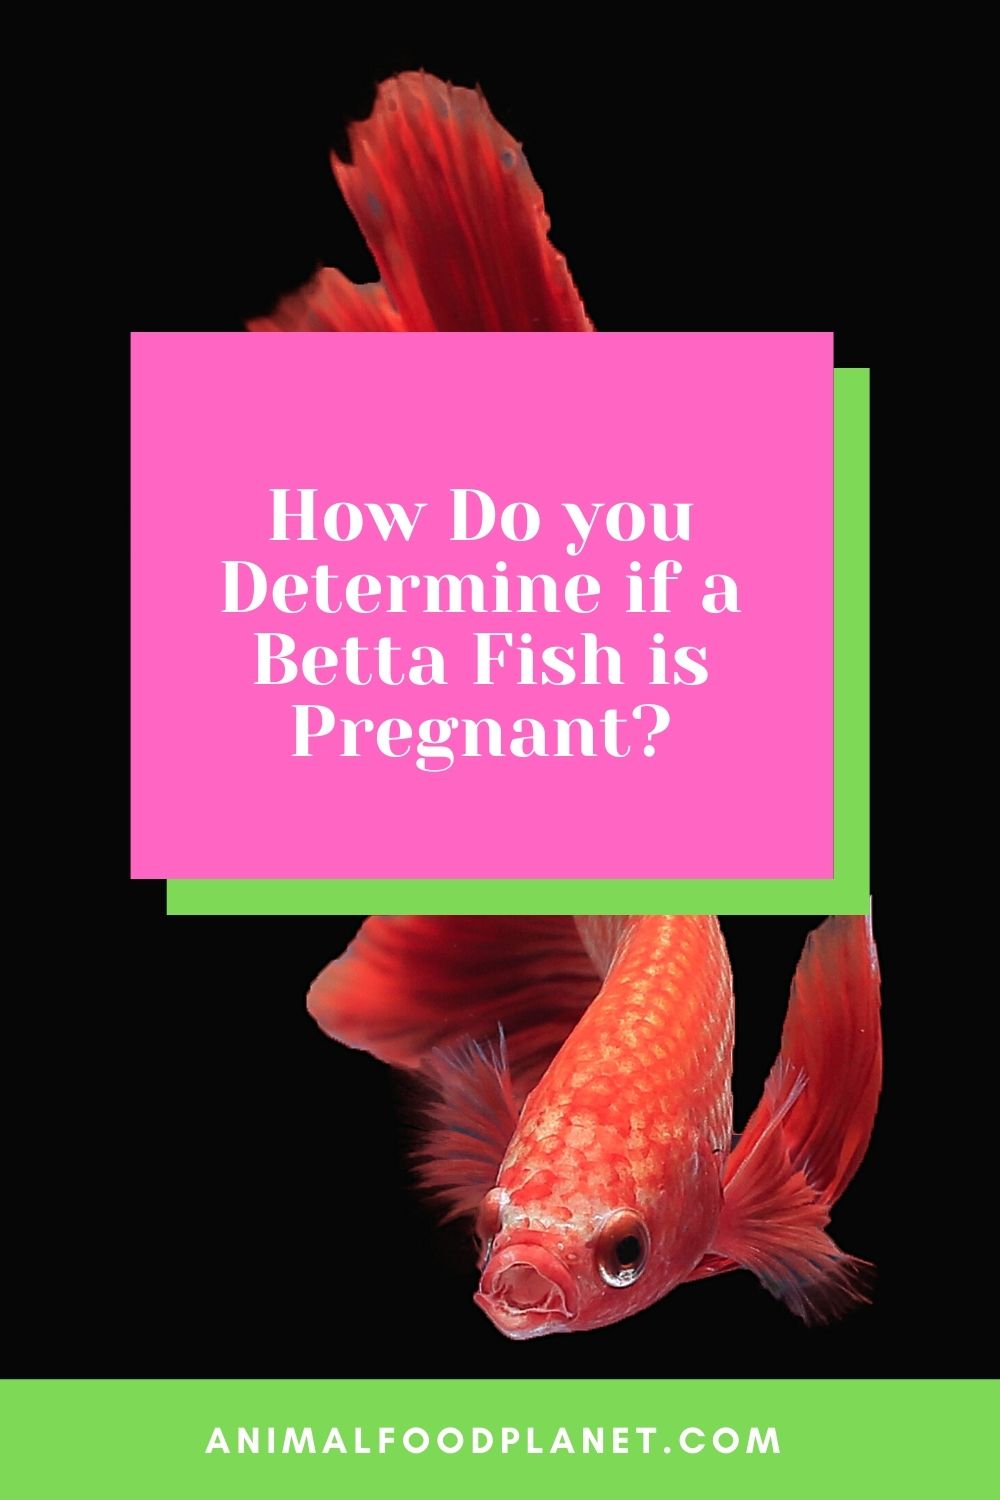 How Do you Determine if a Betta Fish is Pregnant?